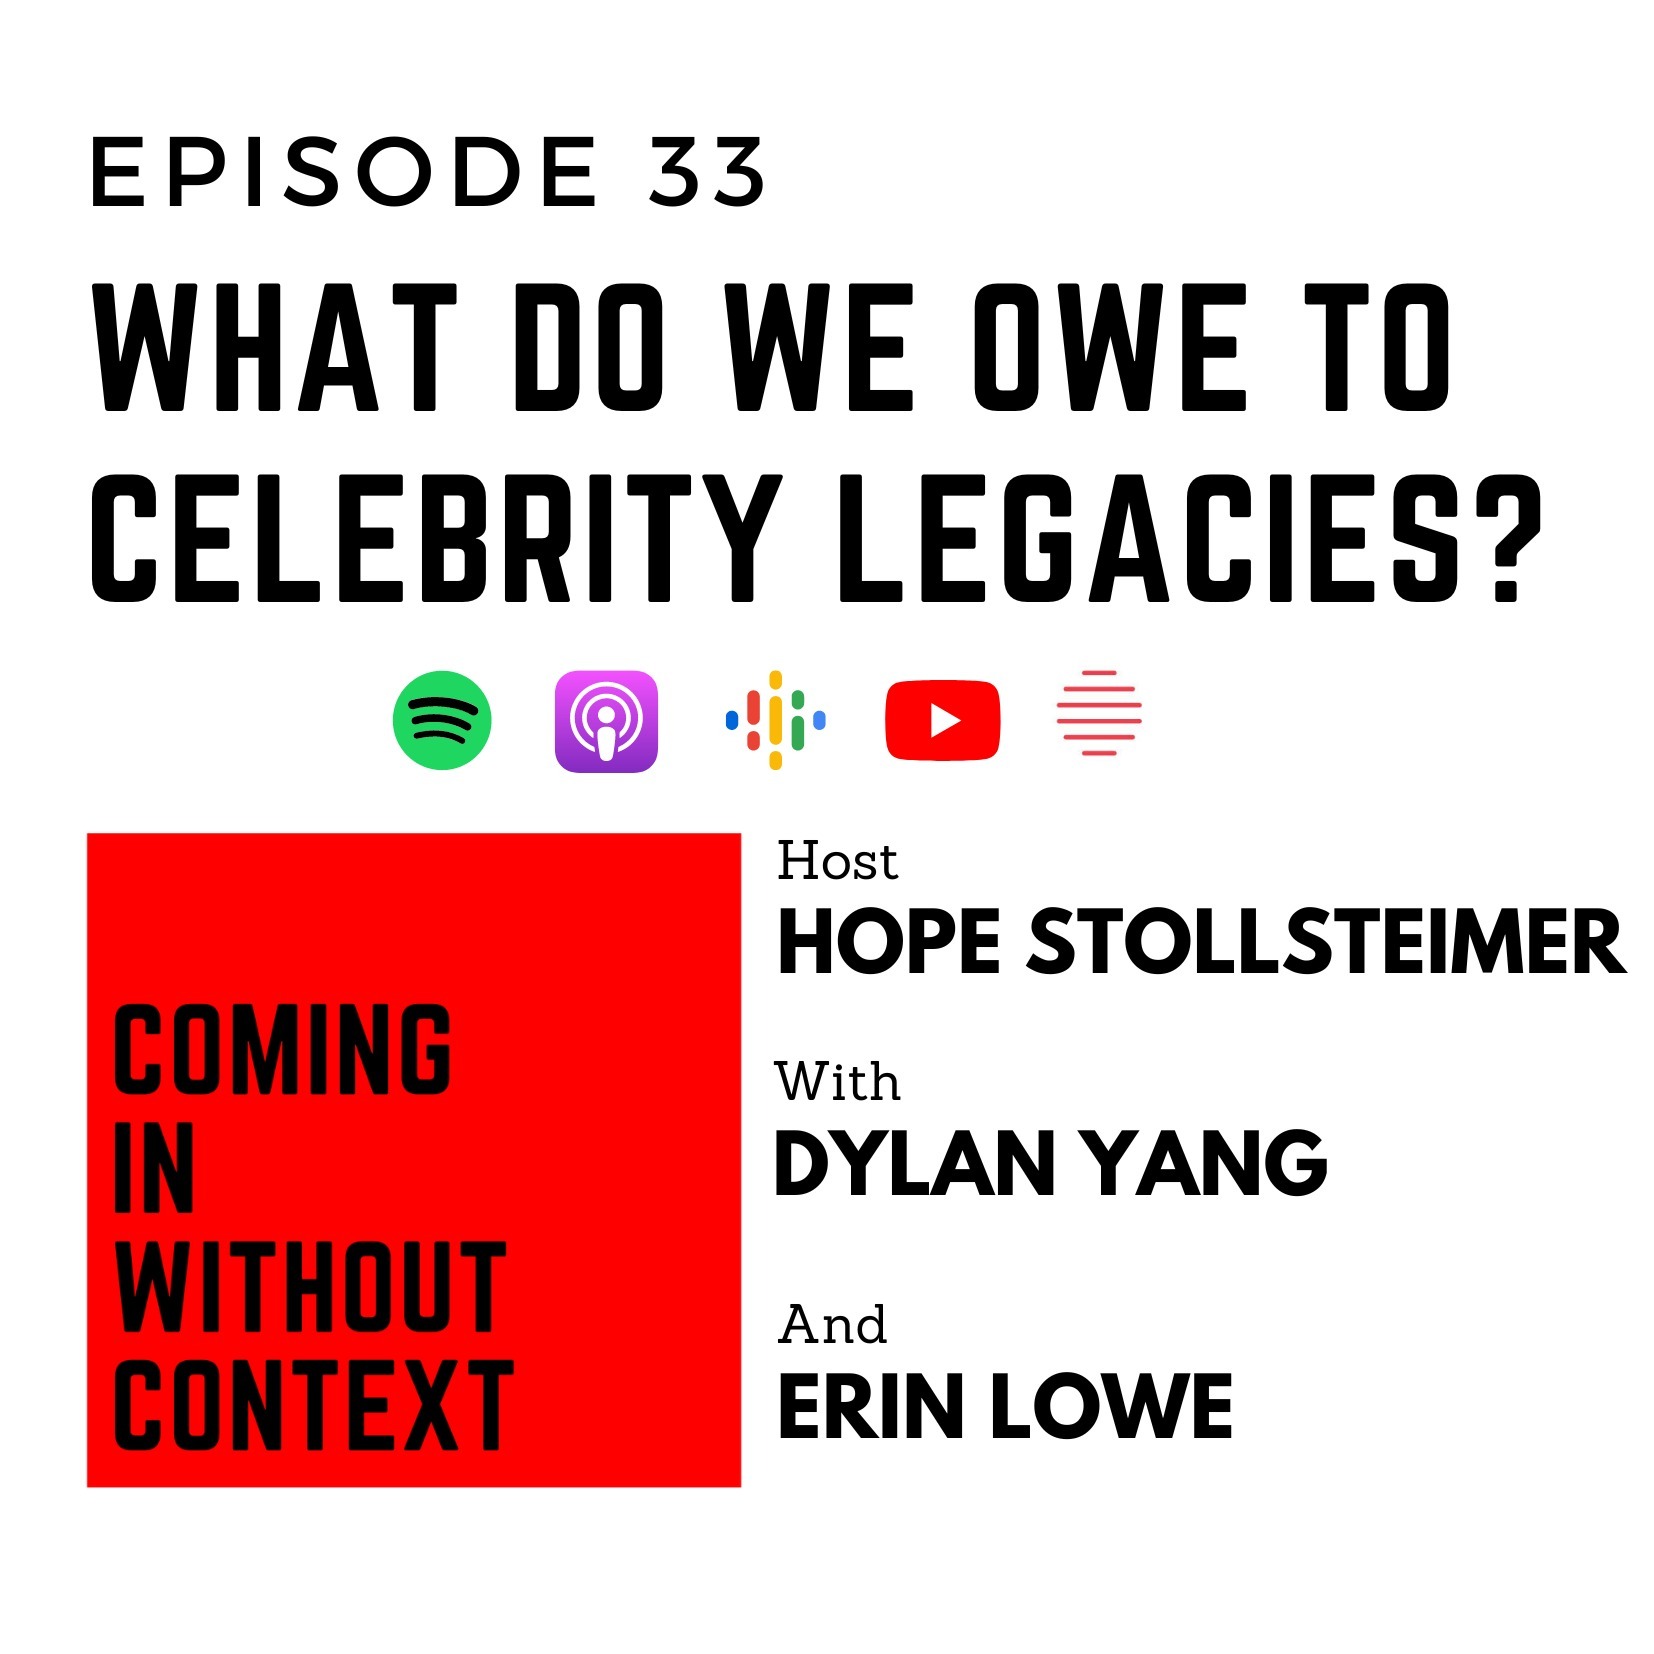 EP 33: What Do We Owe to Celebrity Legacies?